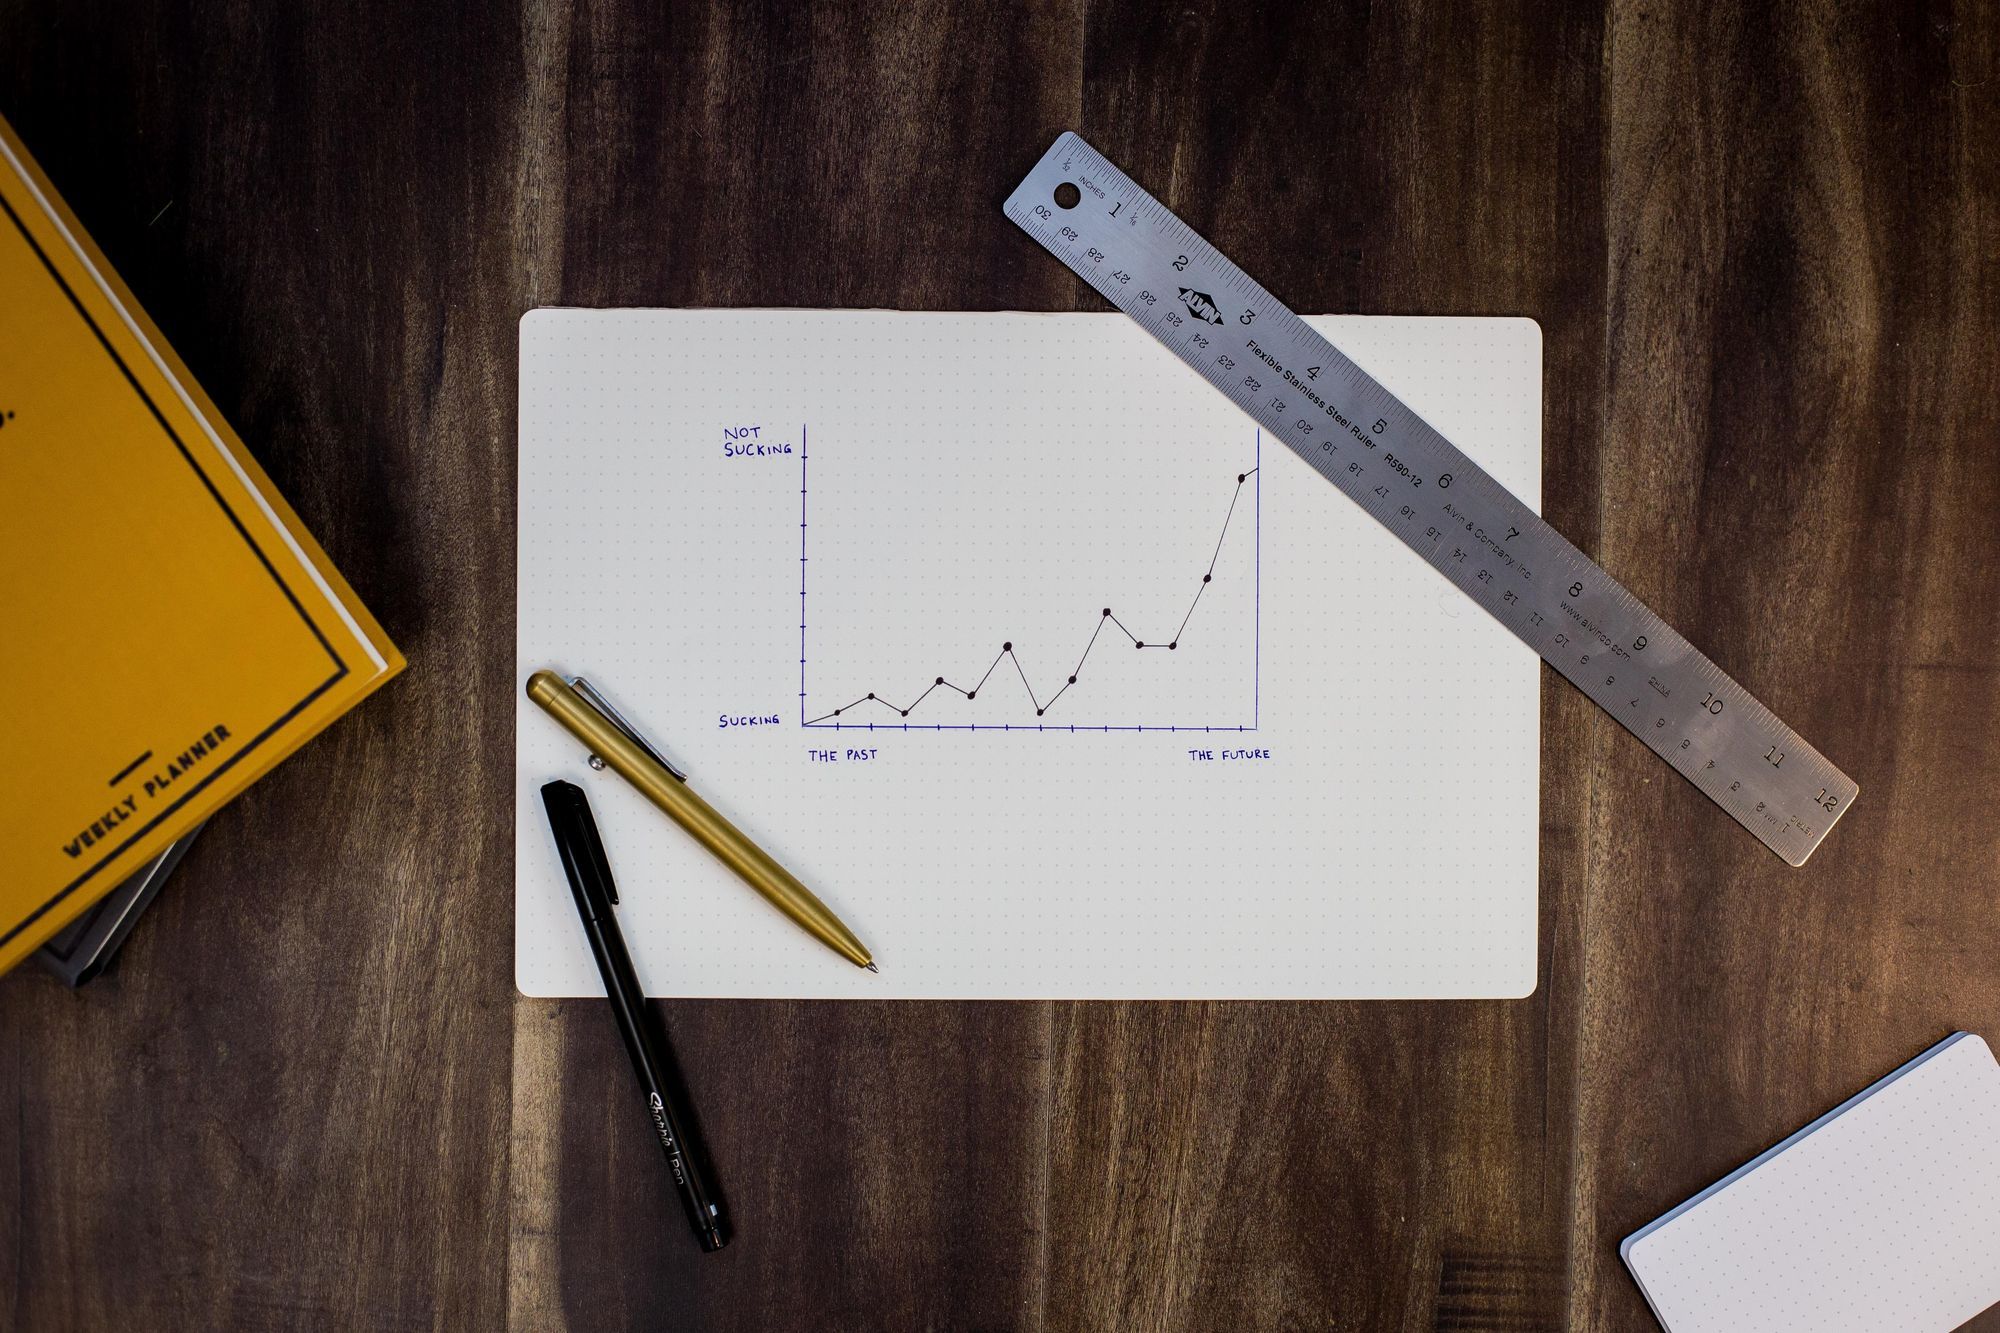 Brand Measurement Essentials: How to Monitor, Analyze, and Grow Your Brand